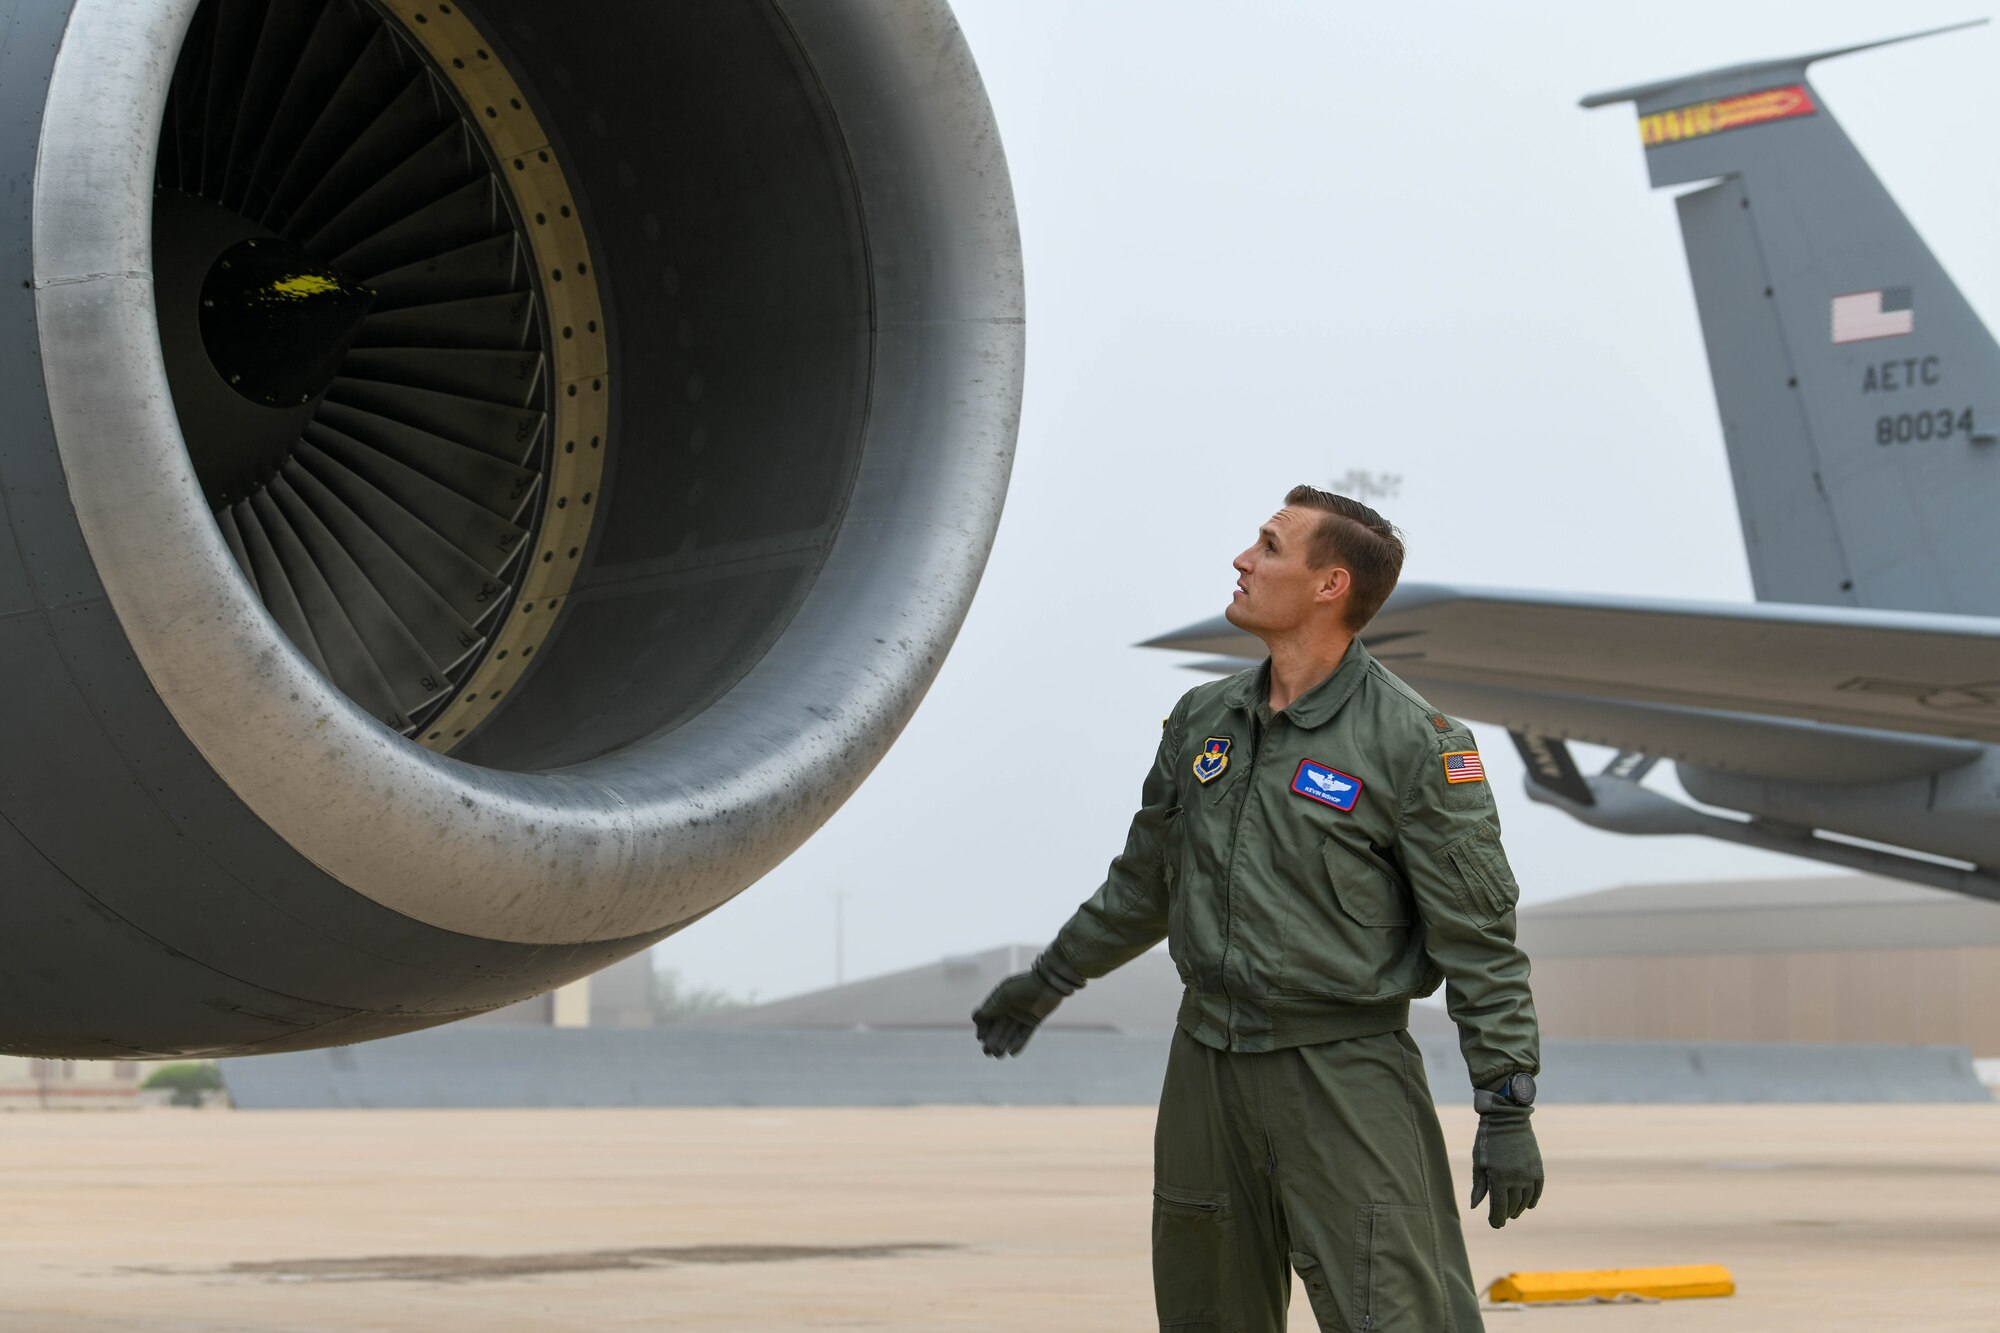 U.S. Air Force Maj. Kevin Bishop, 54th Air Refueling Squadron KC-135 Stratotanker instructor pilot, performs an external inspection of a KC-135 on the flight line during a severe weather flyaway at Altus Air Force Base, Oklahoma, May 4, 2022. Weather predictions forecasted a 50-percent chance of 1.5-inch hail and wind up to 60 knots which could result in extensive damage to the aircraft. (U.S. Air Force photo by Airman 1st Class Trenton Jancze)